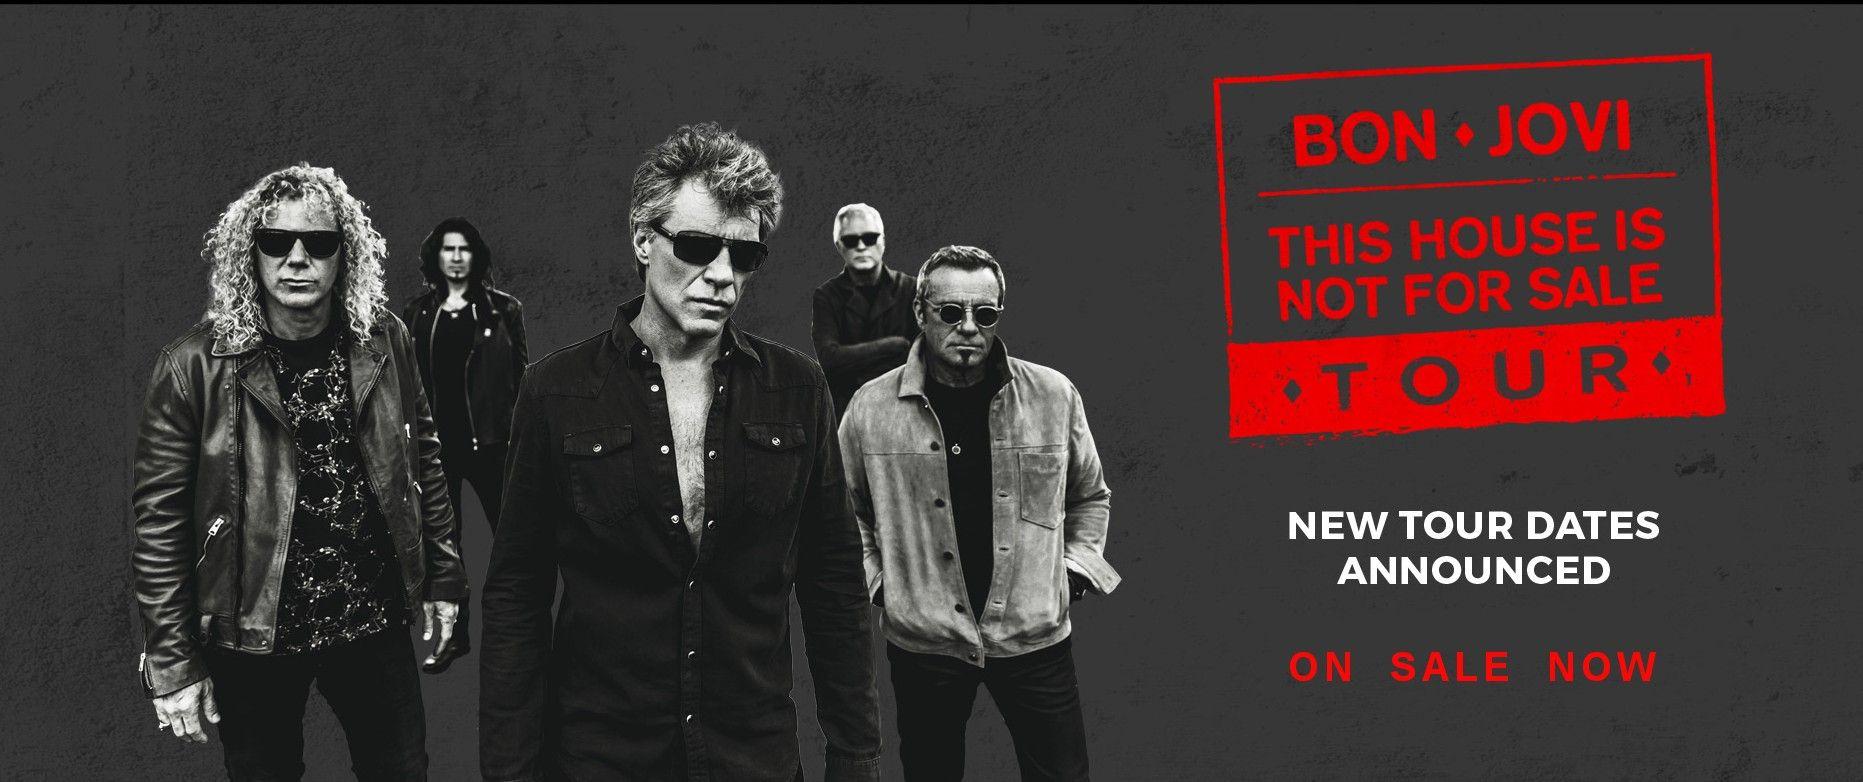 More dates added to Bon Jovi's North American Tour 2017